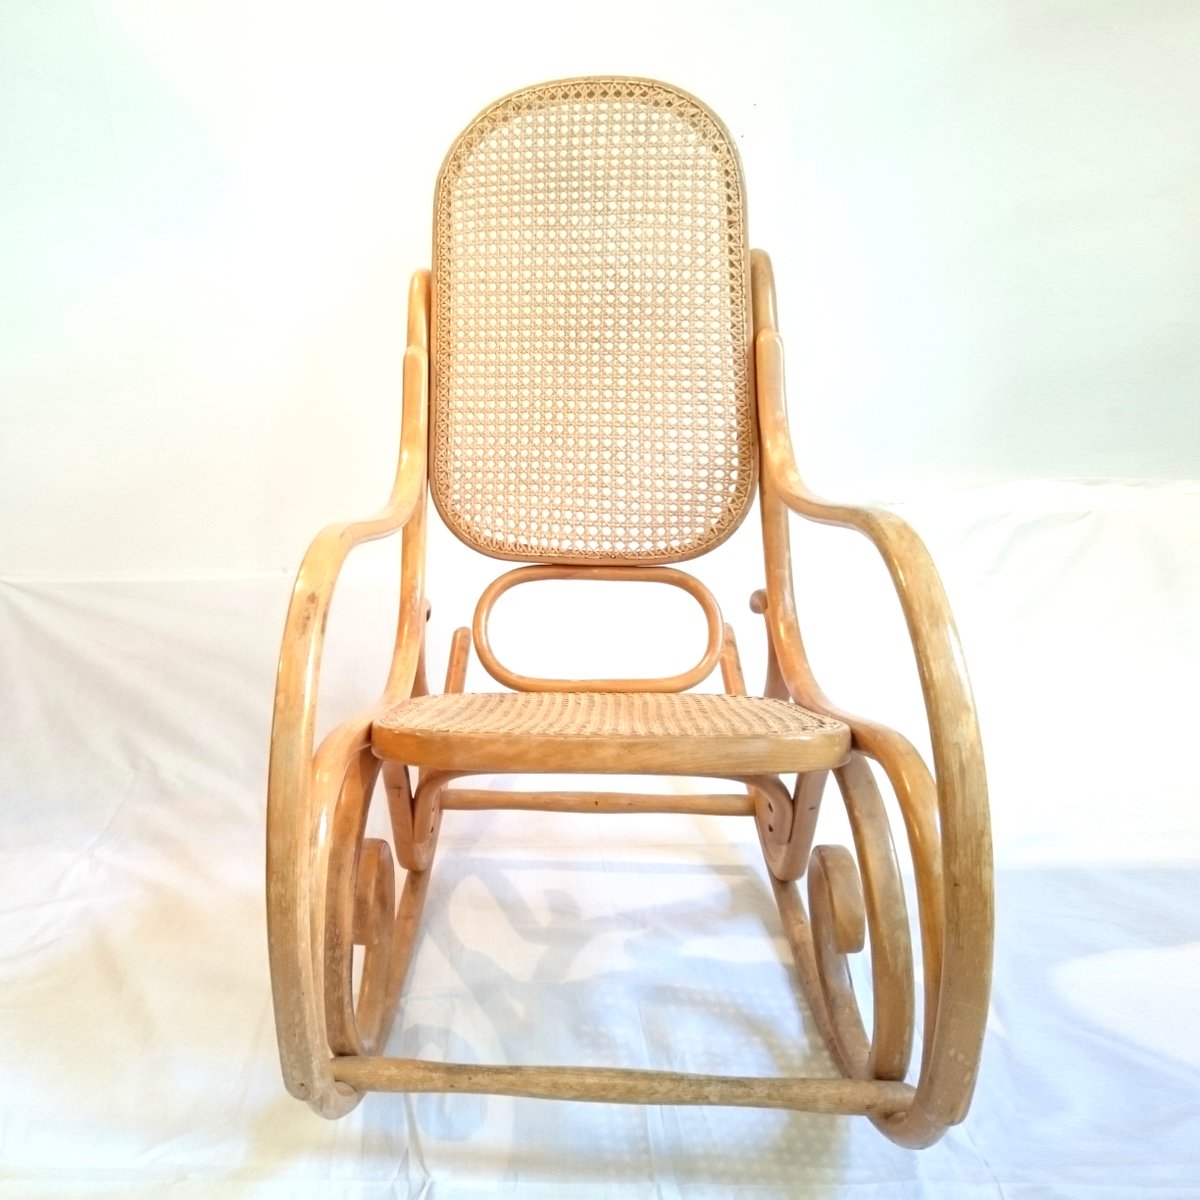 Dinette Bentwood Rocking Chair from Habitat, 1970s for sale at Pamono